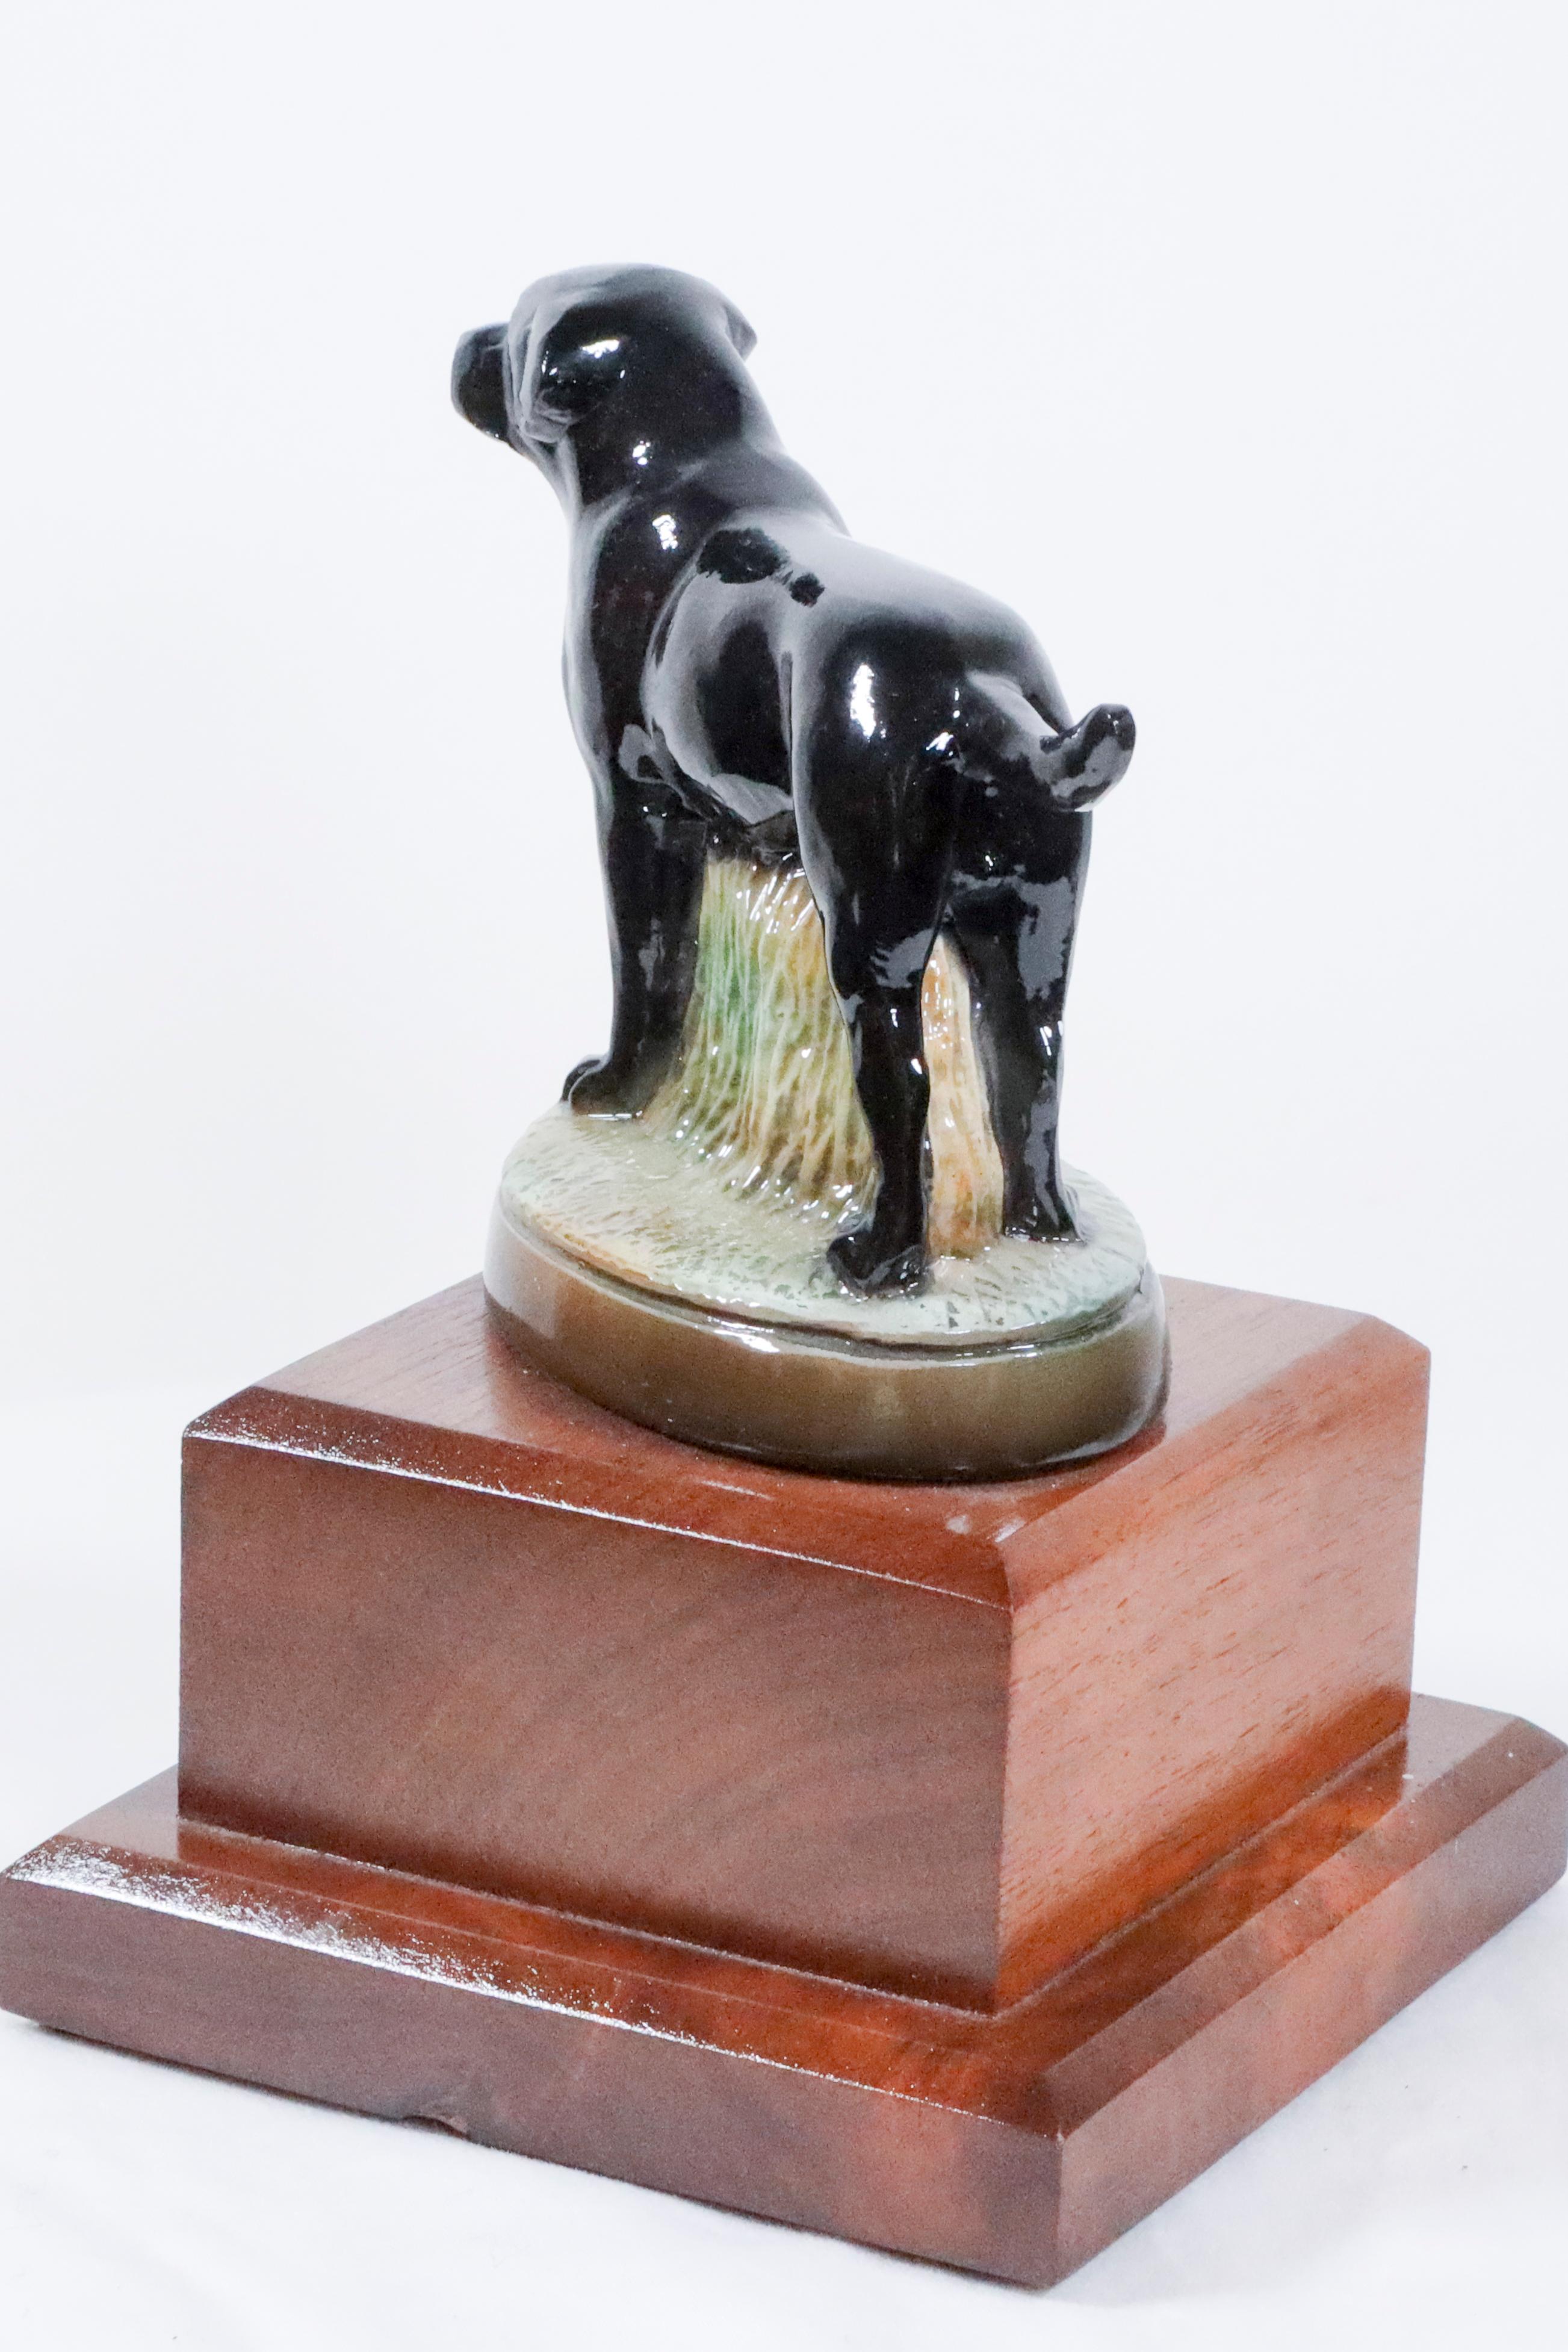 The Black Labrador Retriever, one of the most beloved dogs in the world, was made and hand cast and hand painted from the foundry that cast all of the jockeys for the 21 Club in NYC.  We have used these for trophys, keepsakes and the object you love